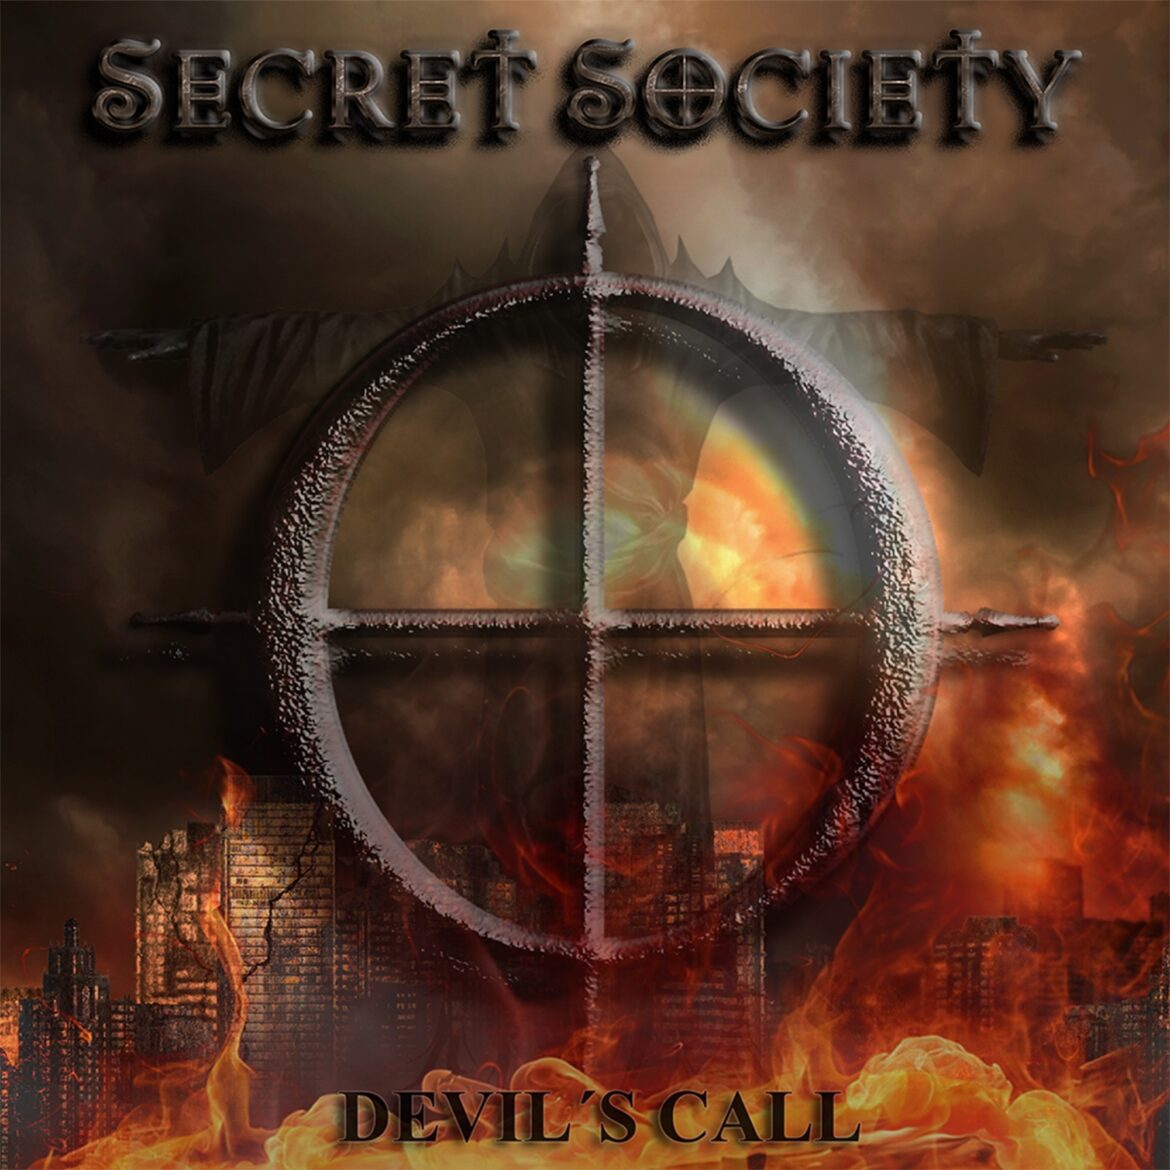 SECRET SOCIETY – Drop New Song Teaser Featuring Ripper Owens